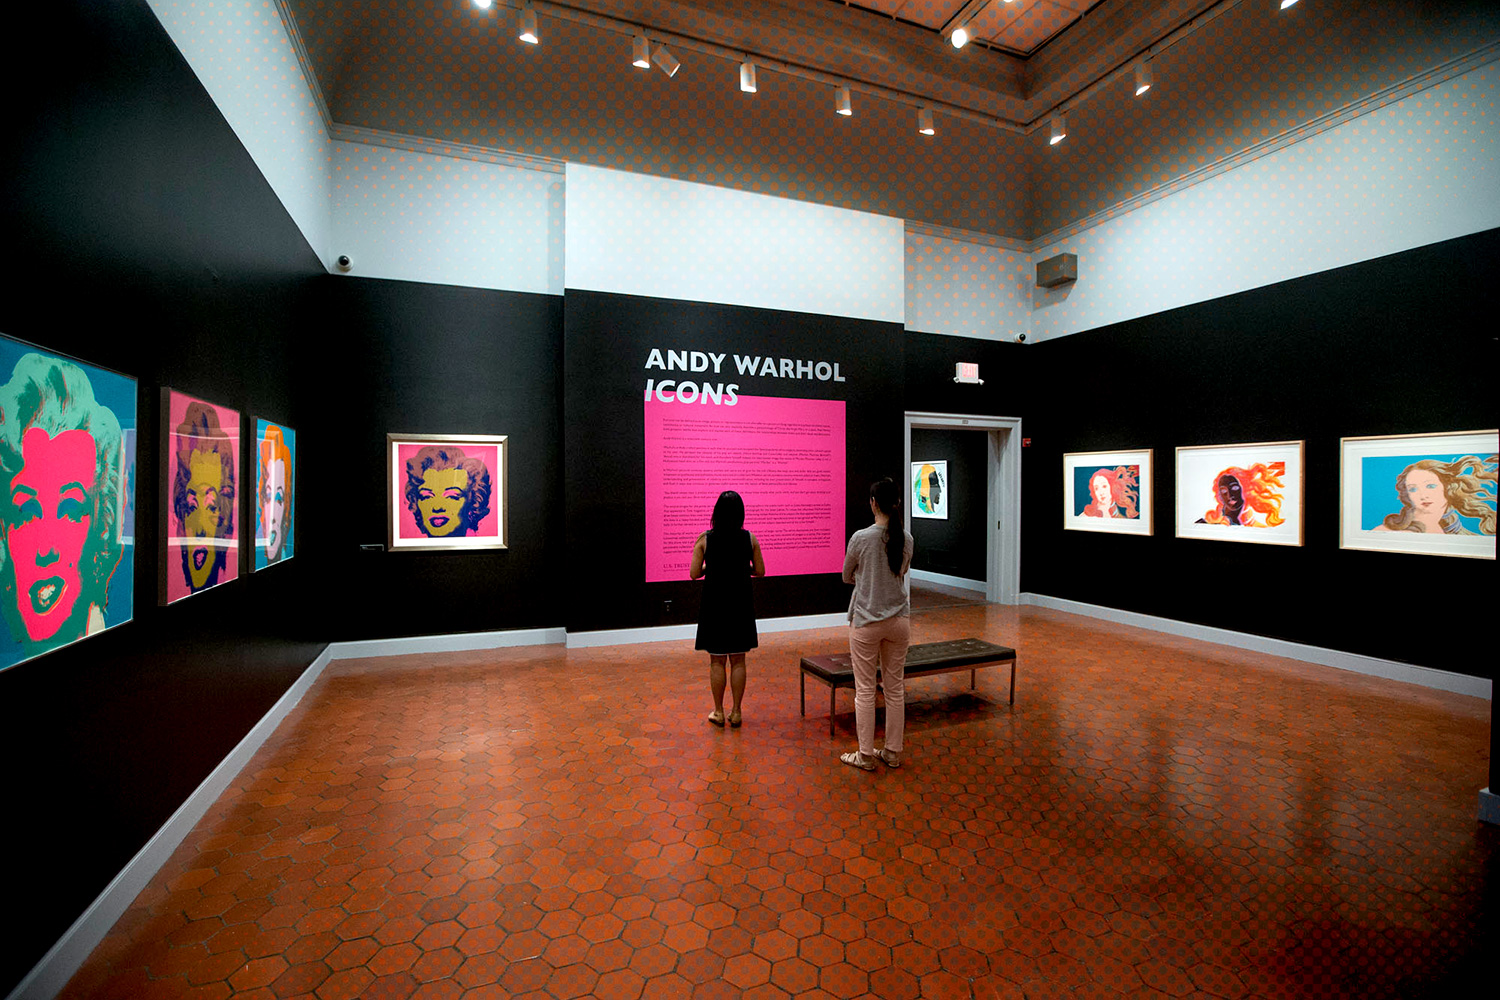 People reading a sign at the Andy Warhol Icons art exhibit